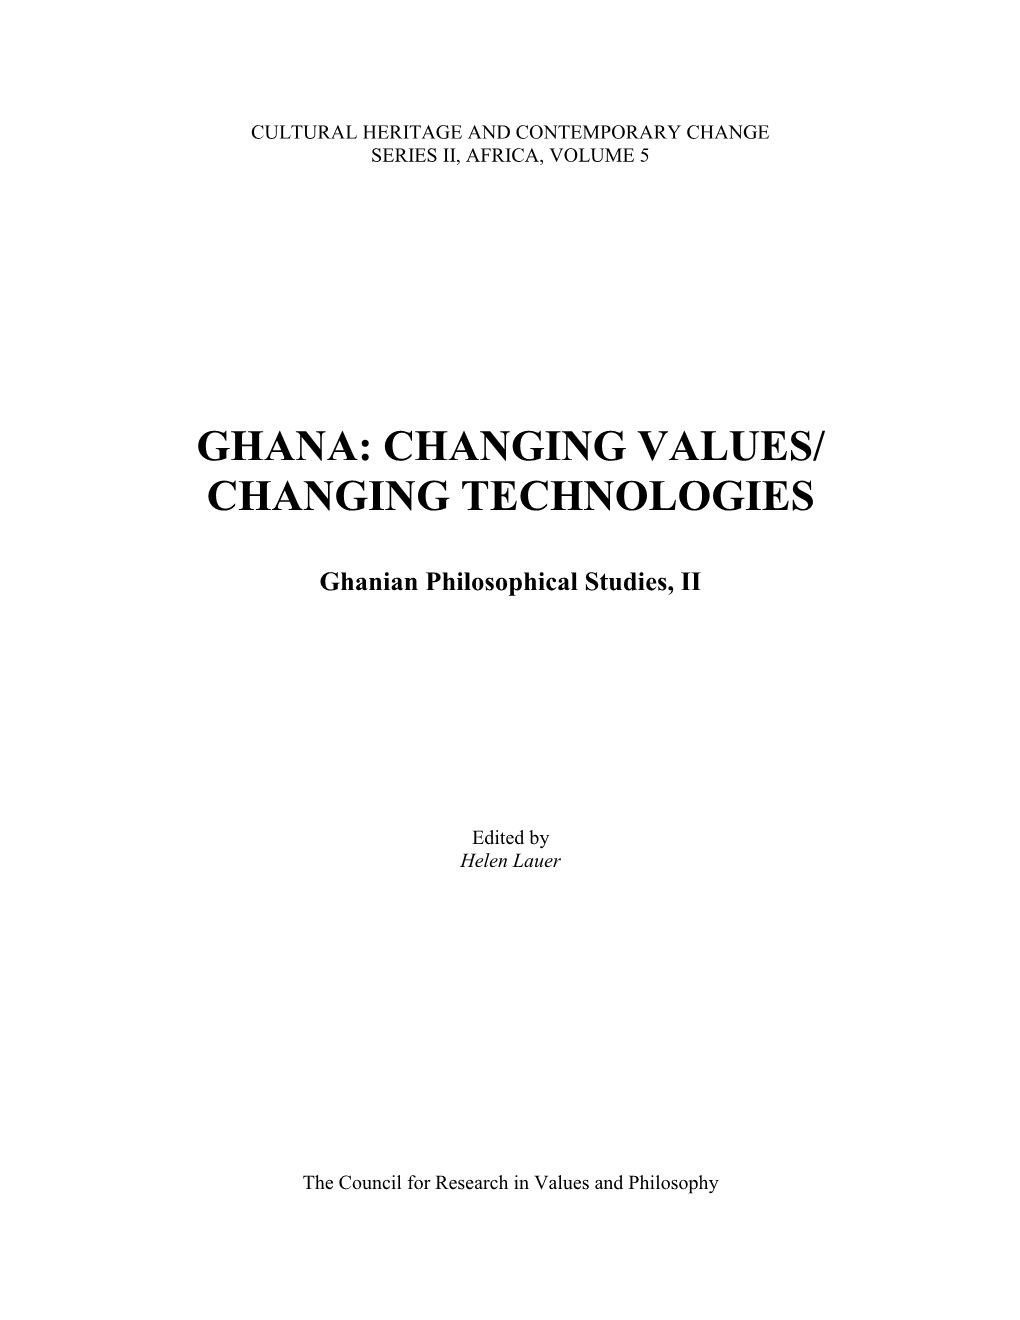 Ghana: Changing Values/ Changing Technologies